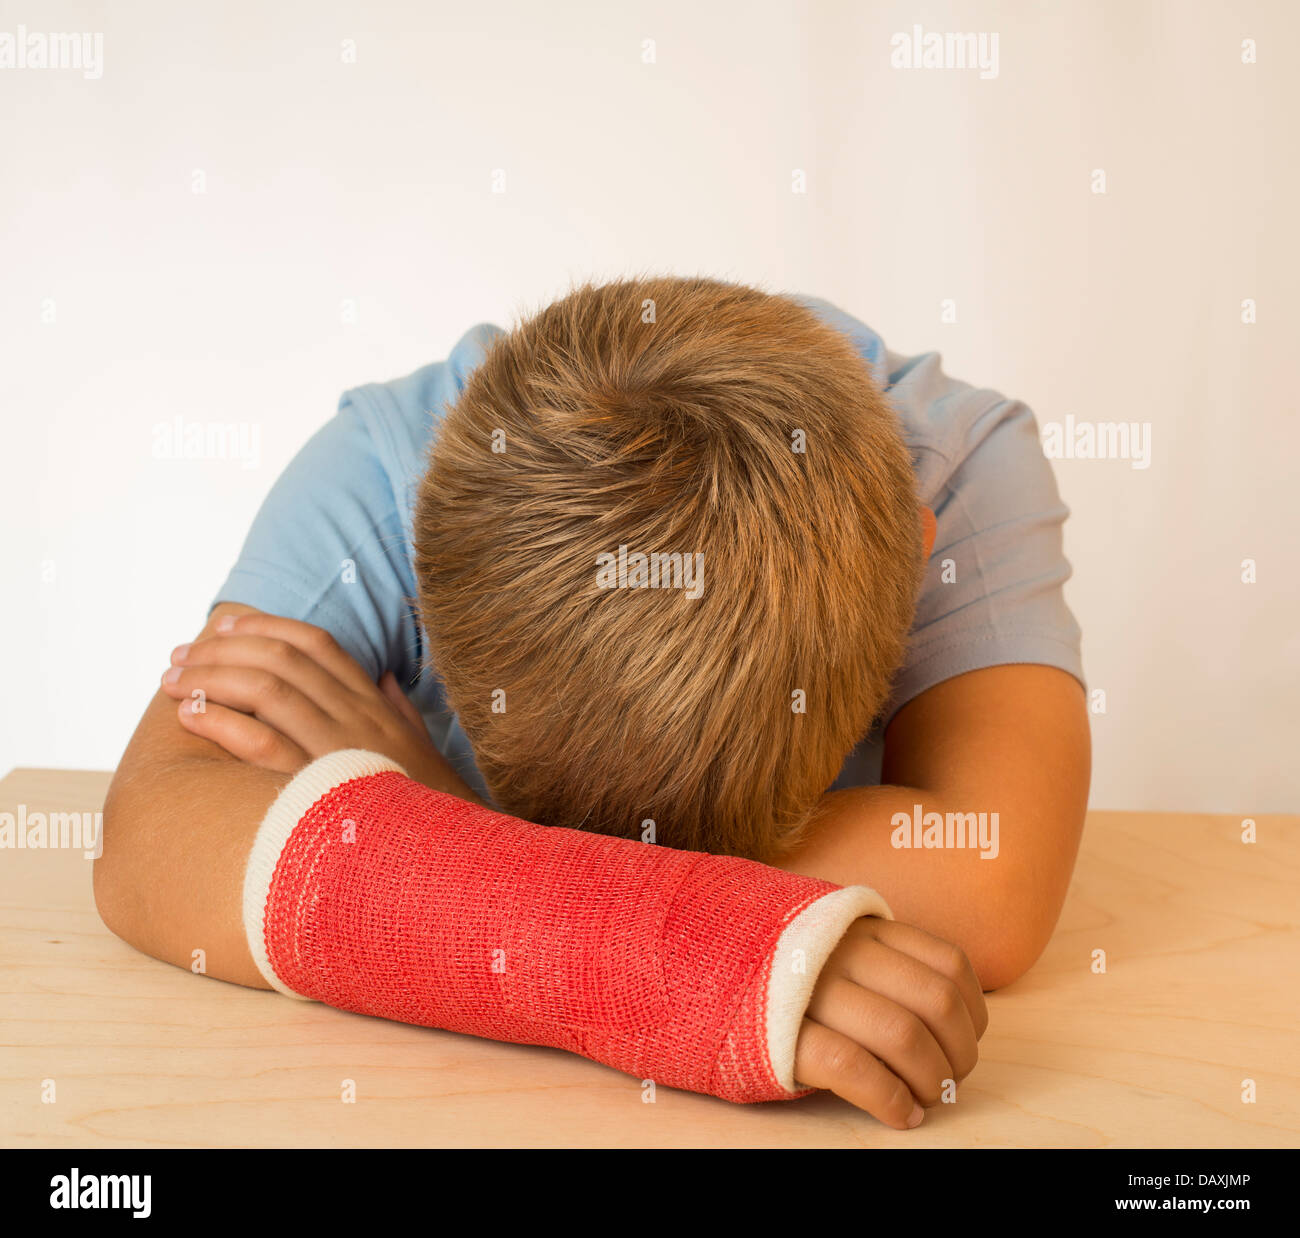 Sad young boy with arm in plaster cast. Stock Photo